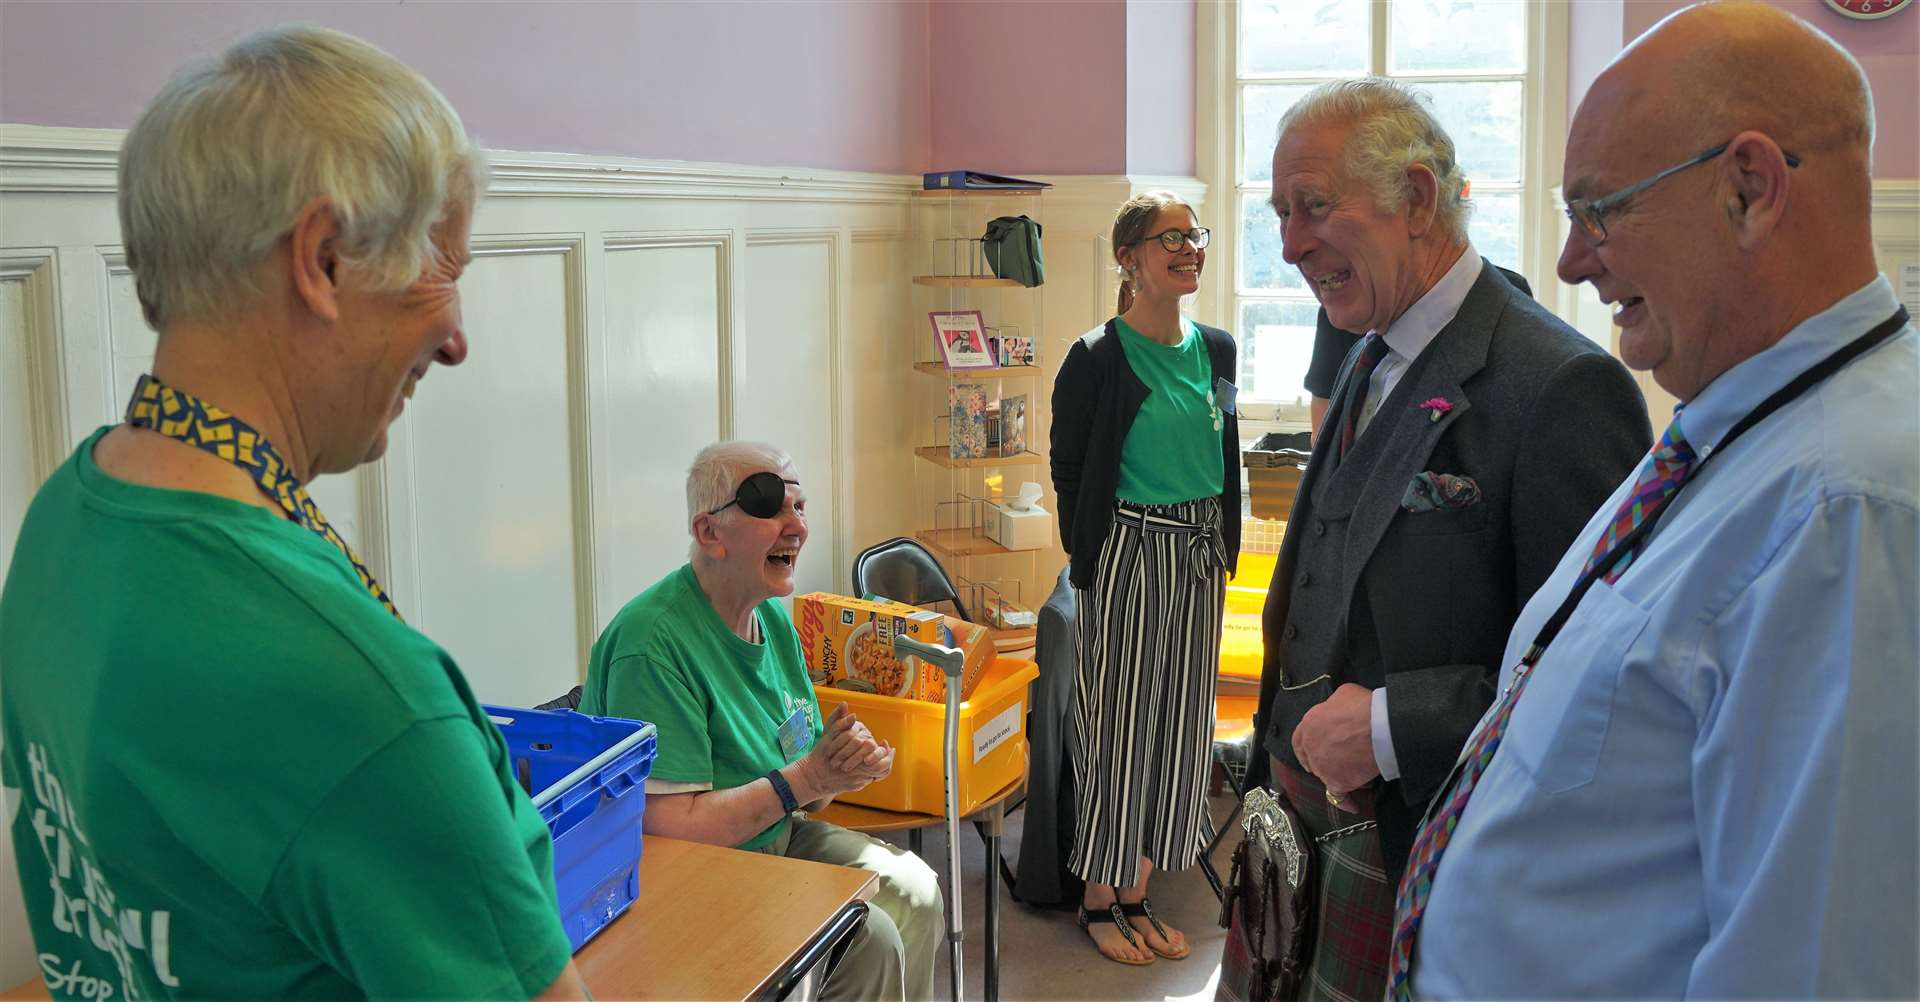 Garry Robertson, a volunteer at the food bank, guffaws as Prince Charles makes a light-hearted comment. Picture: DGS